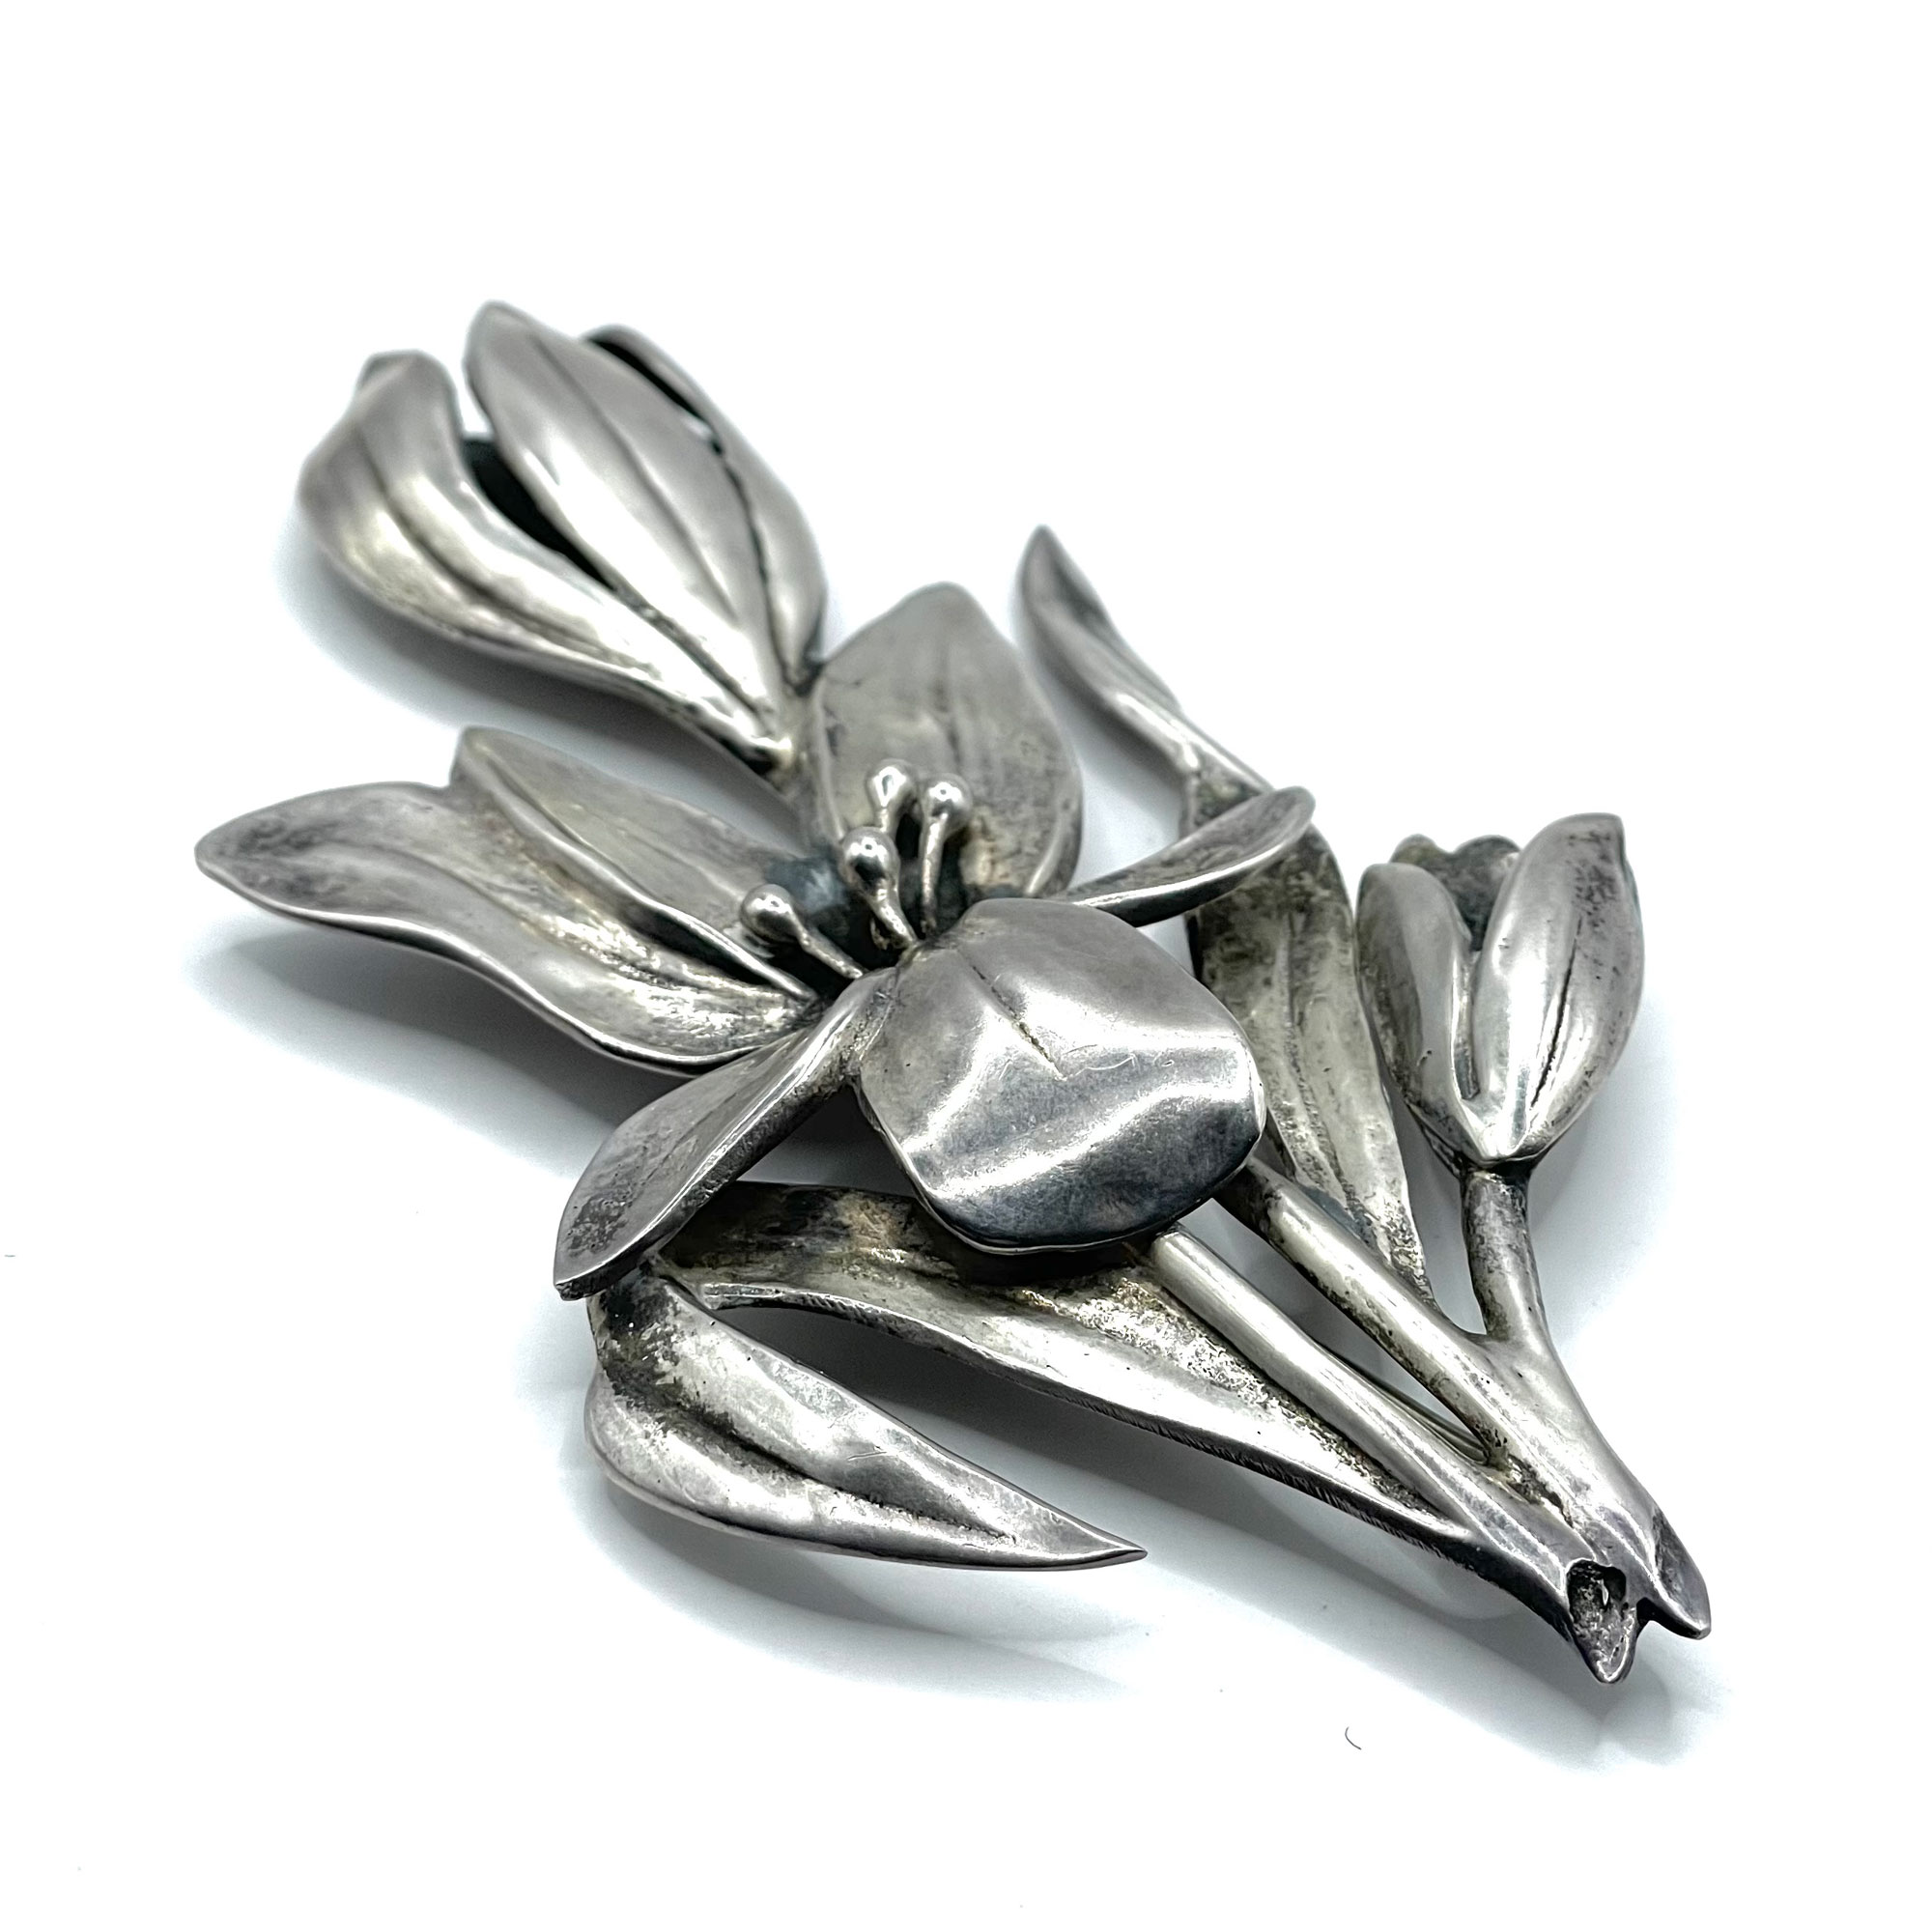 Large hand crafted sterling silver flower brooch